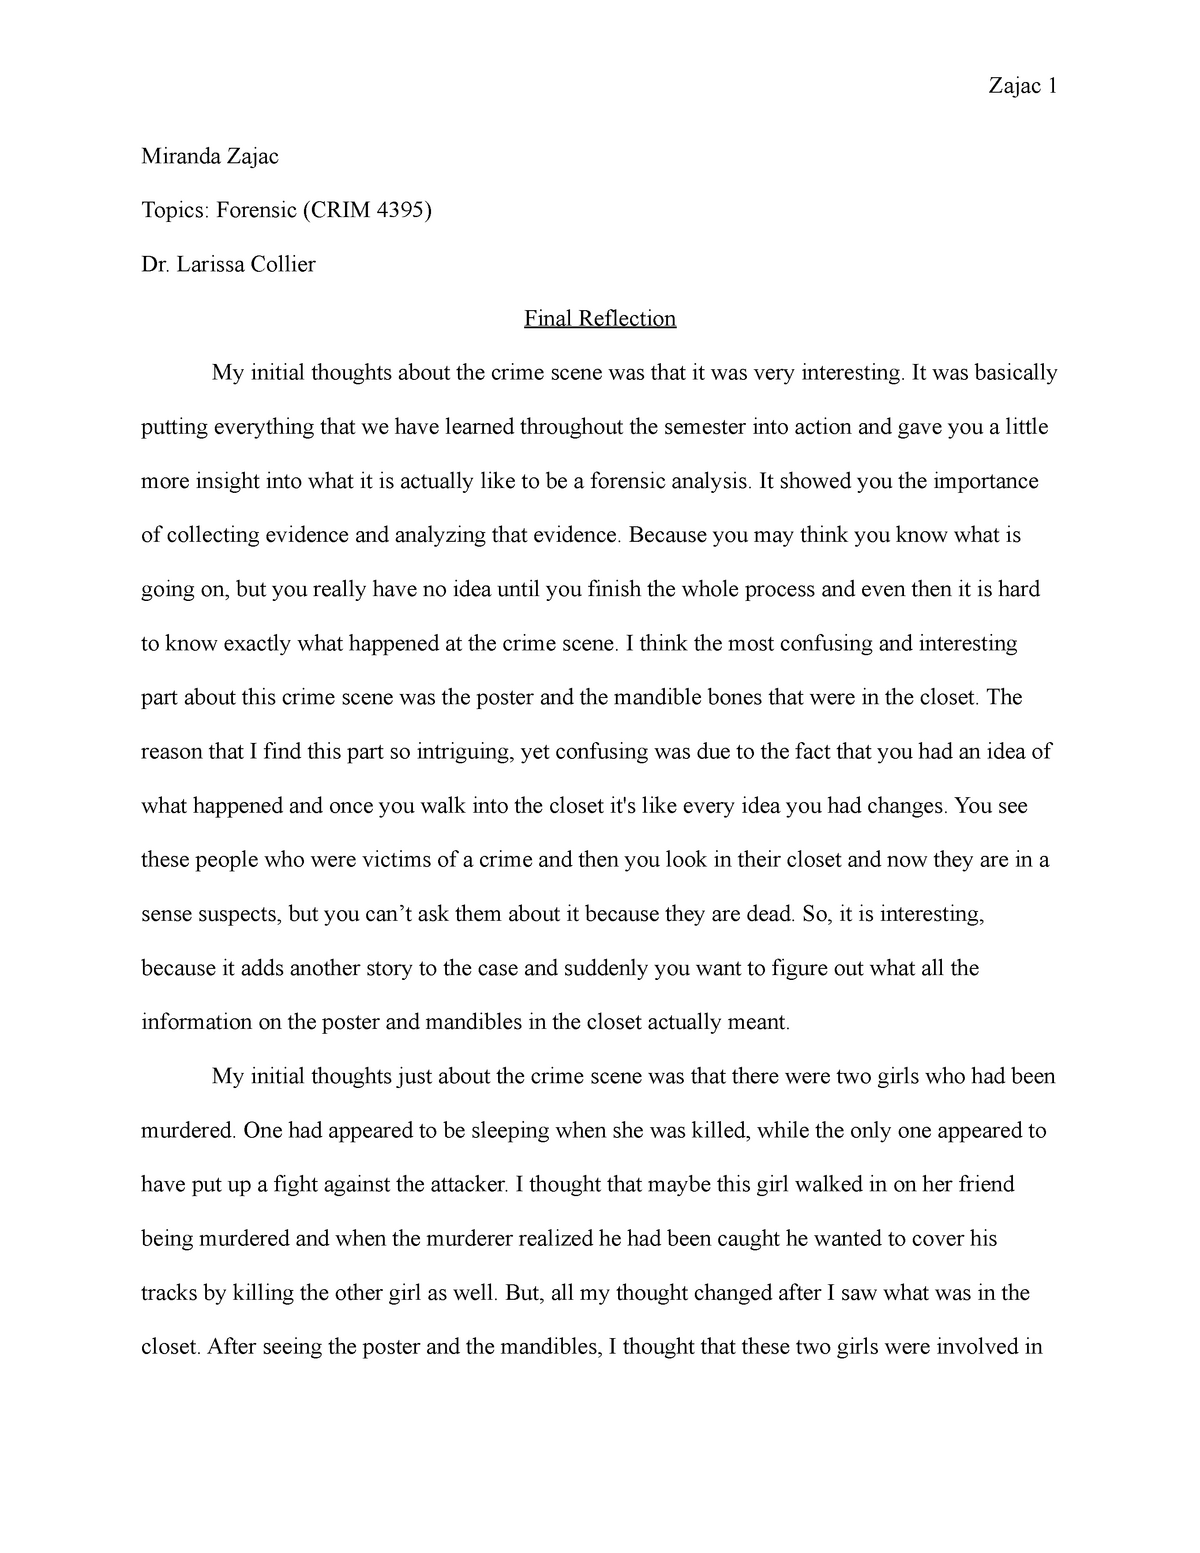 essay about forensic science